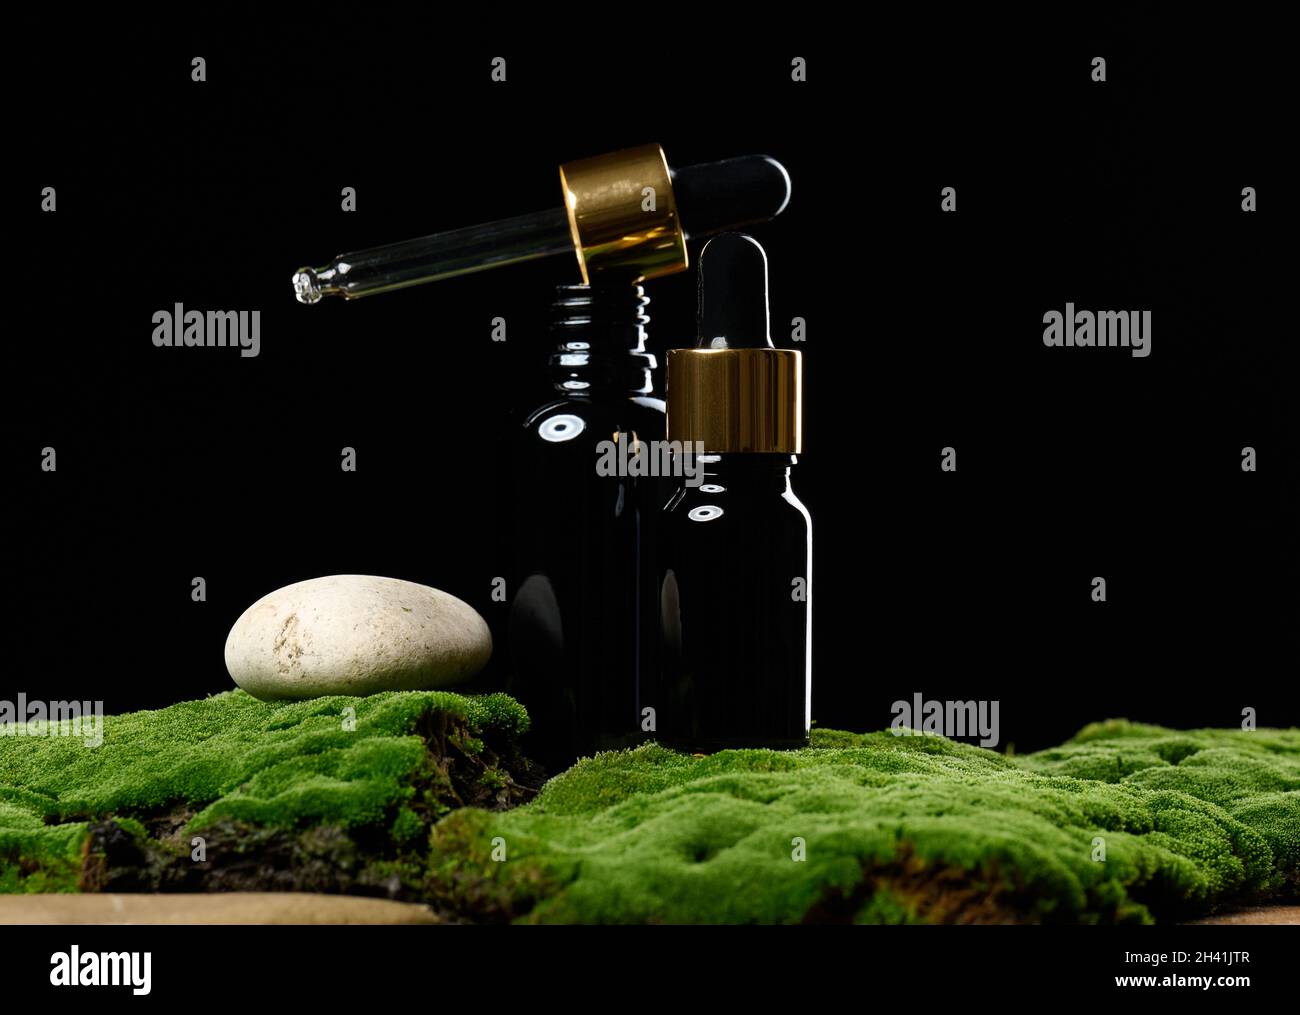 Black glass bottle with pipette stands on green moss, black background. Cosmetics SPA branding. Packaging for gel, serum, advert Stock Photo